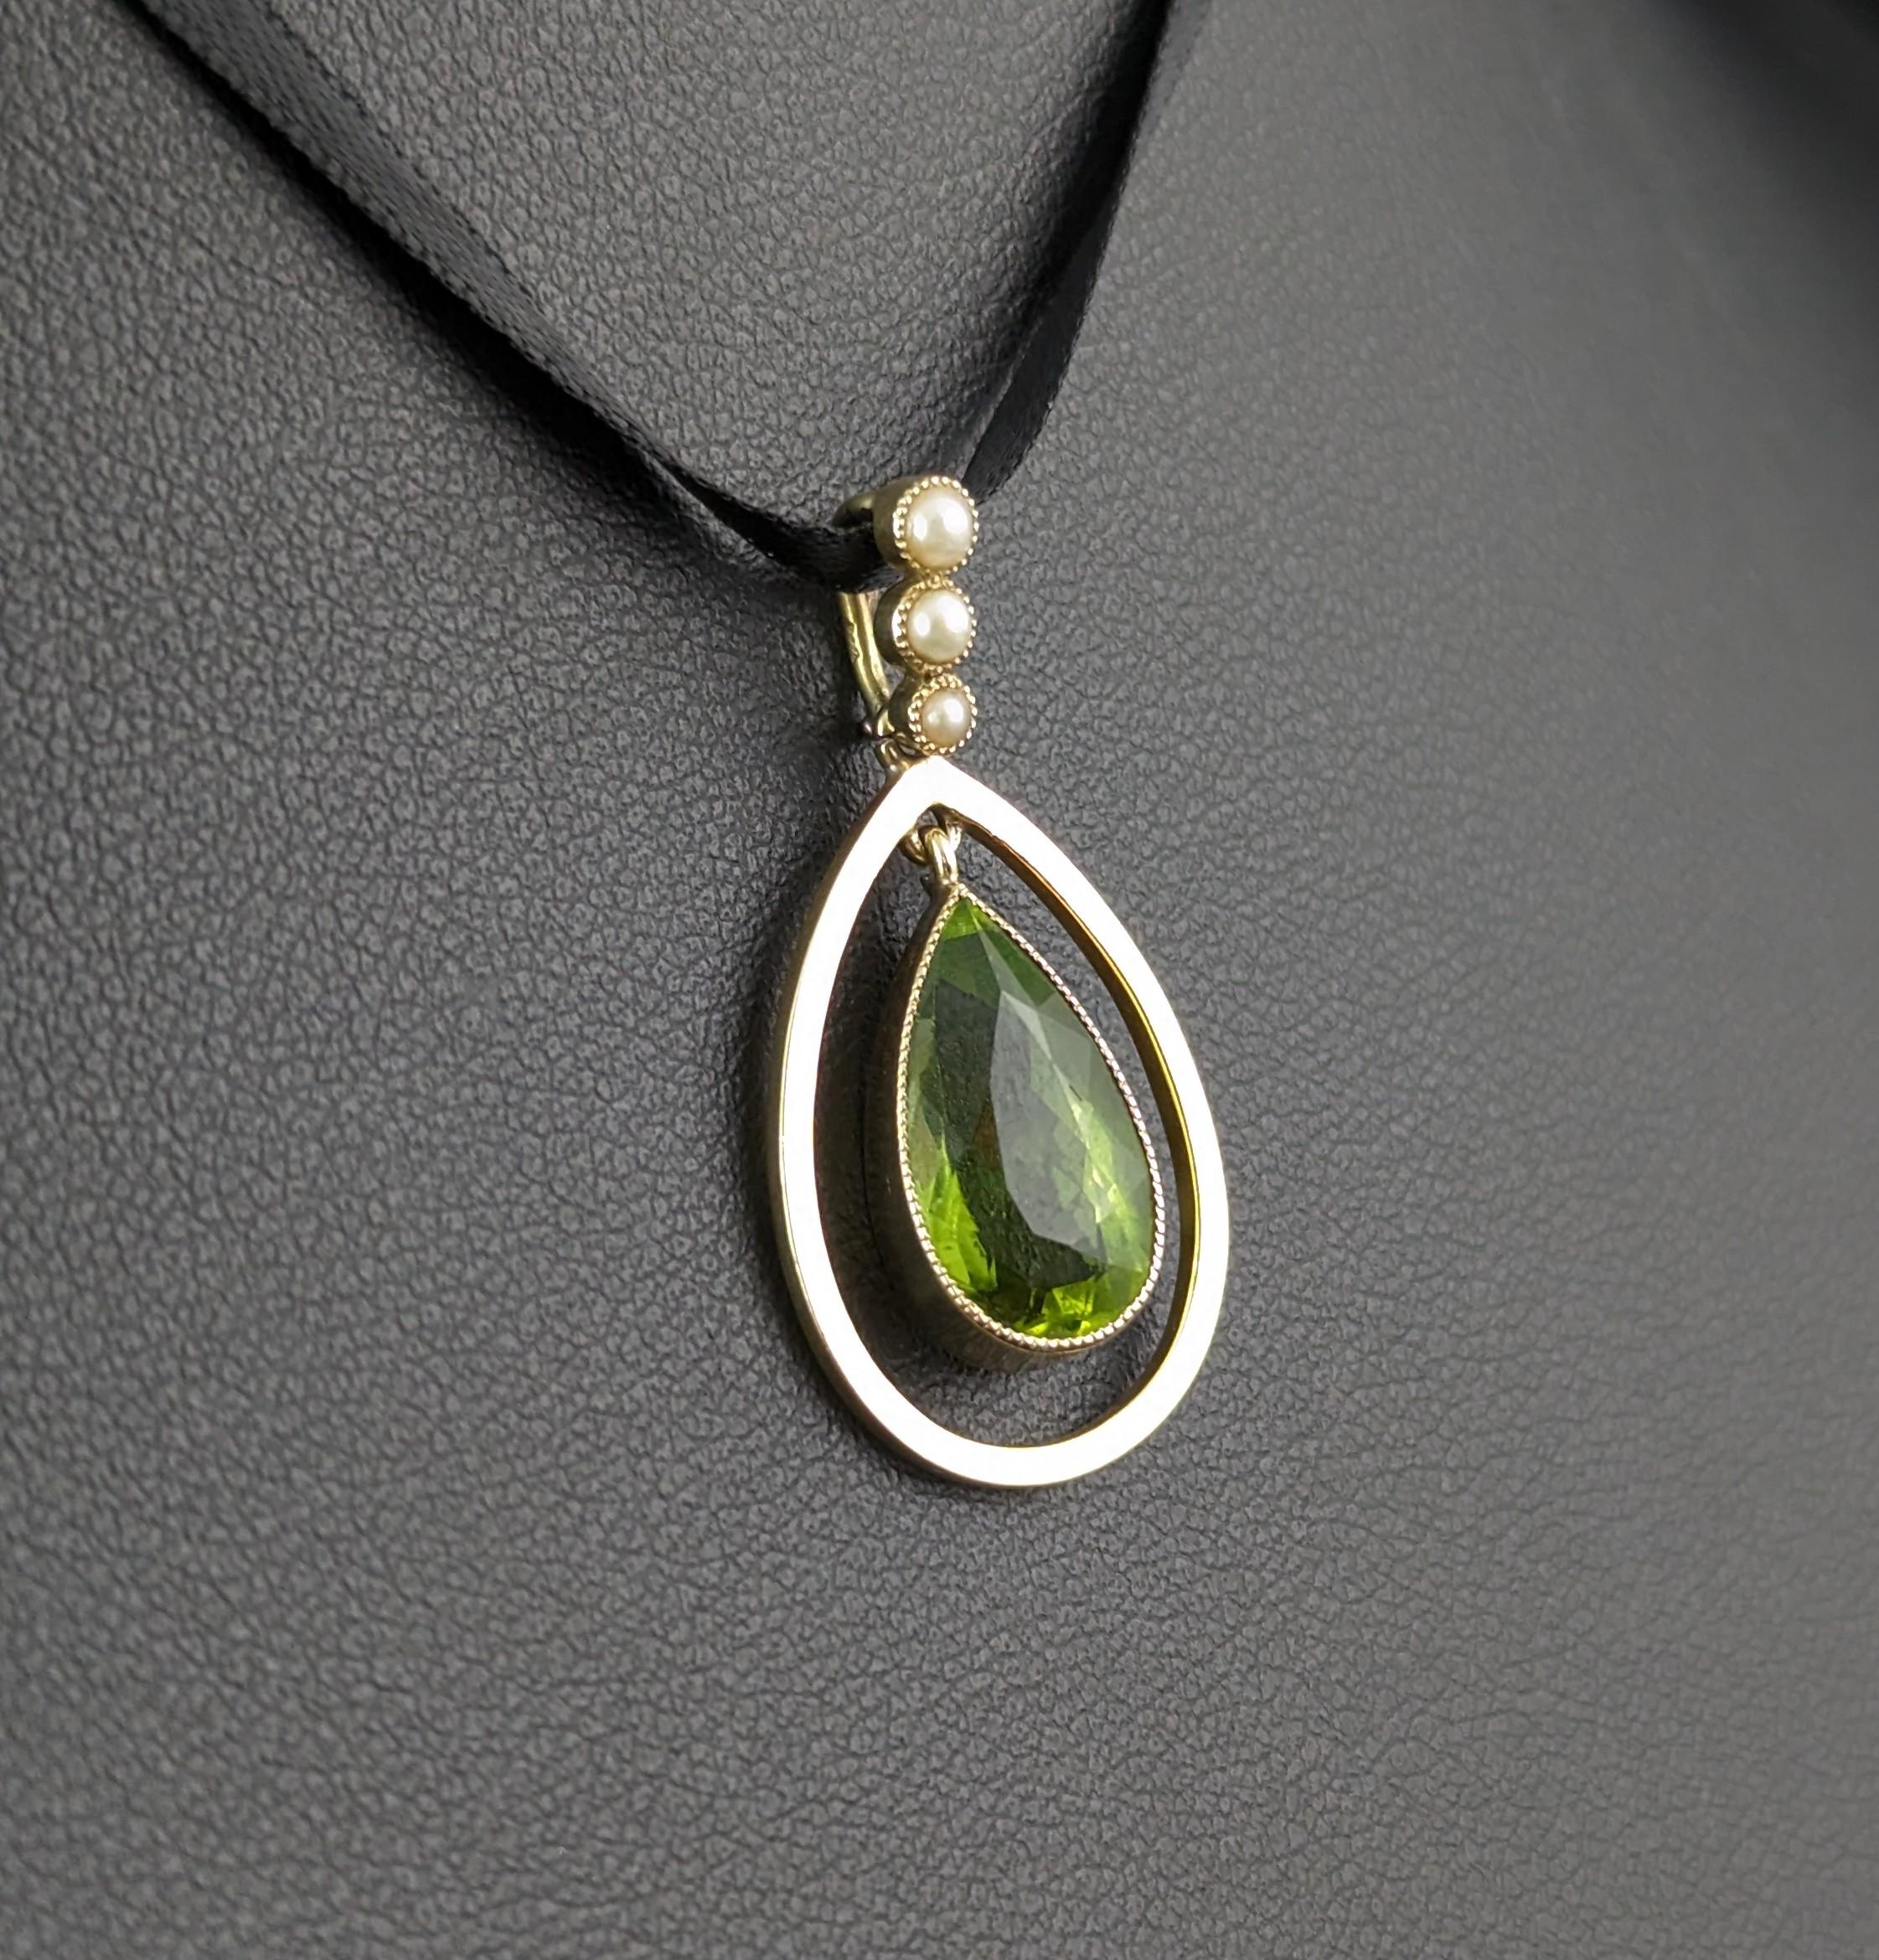 Antique Peridot and seed pearl pendant, 9k gold, Art Nouveau  1